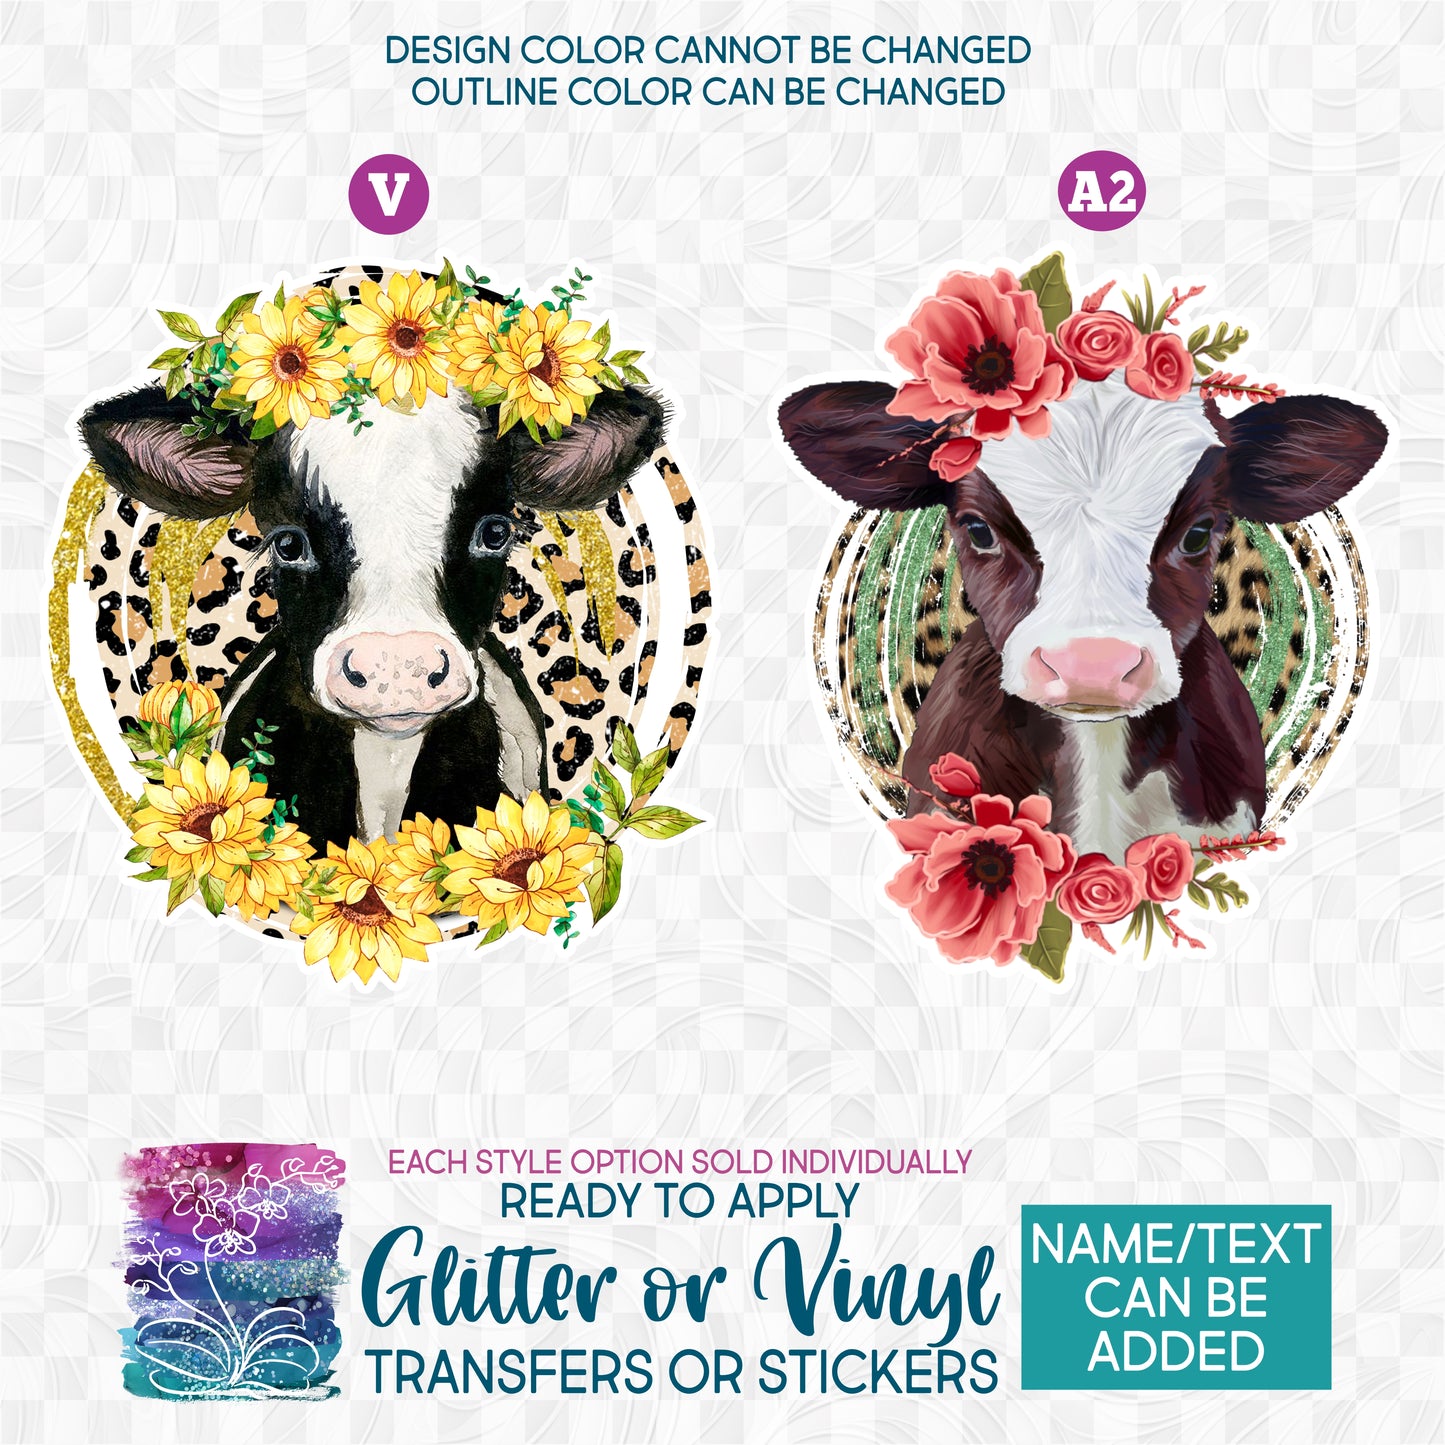 (s003-2) Baby Cow Sunflowers Poppies Glitter or Vinyl Iron-On Transfer or Sticker